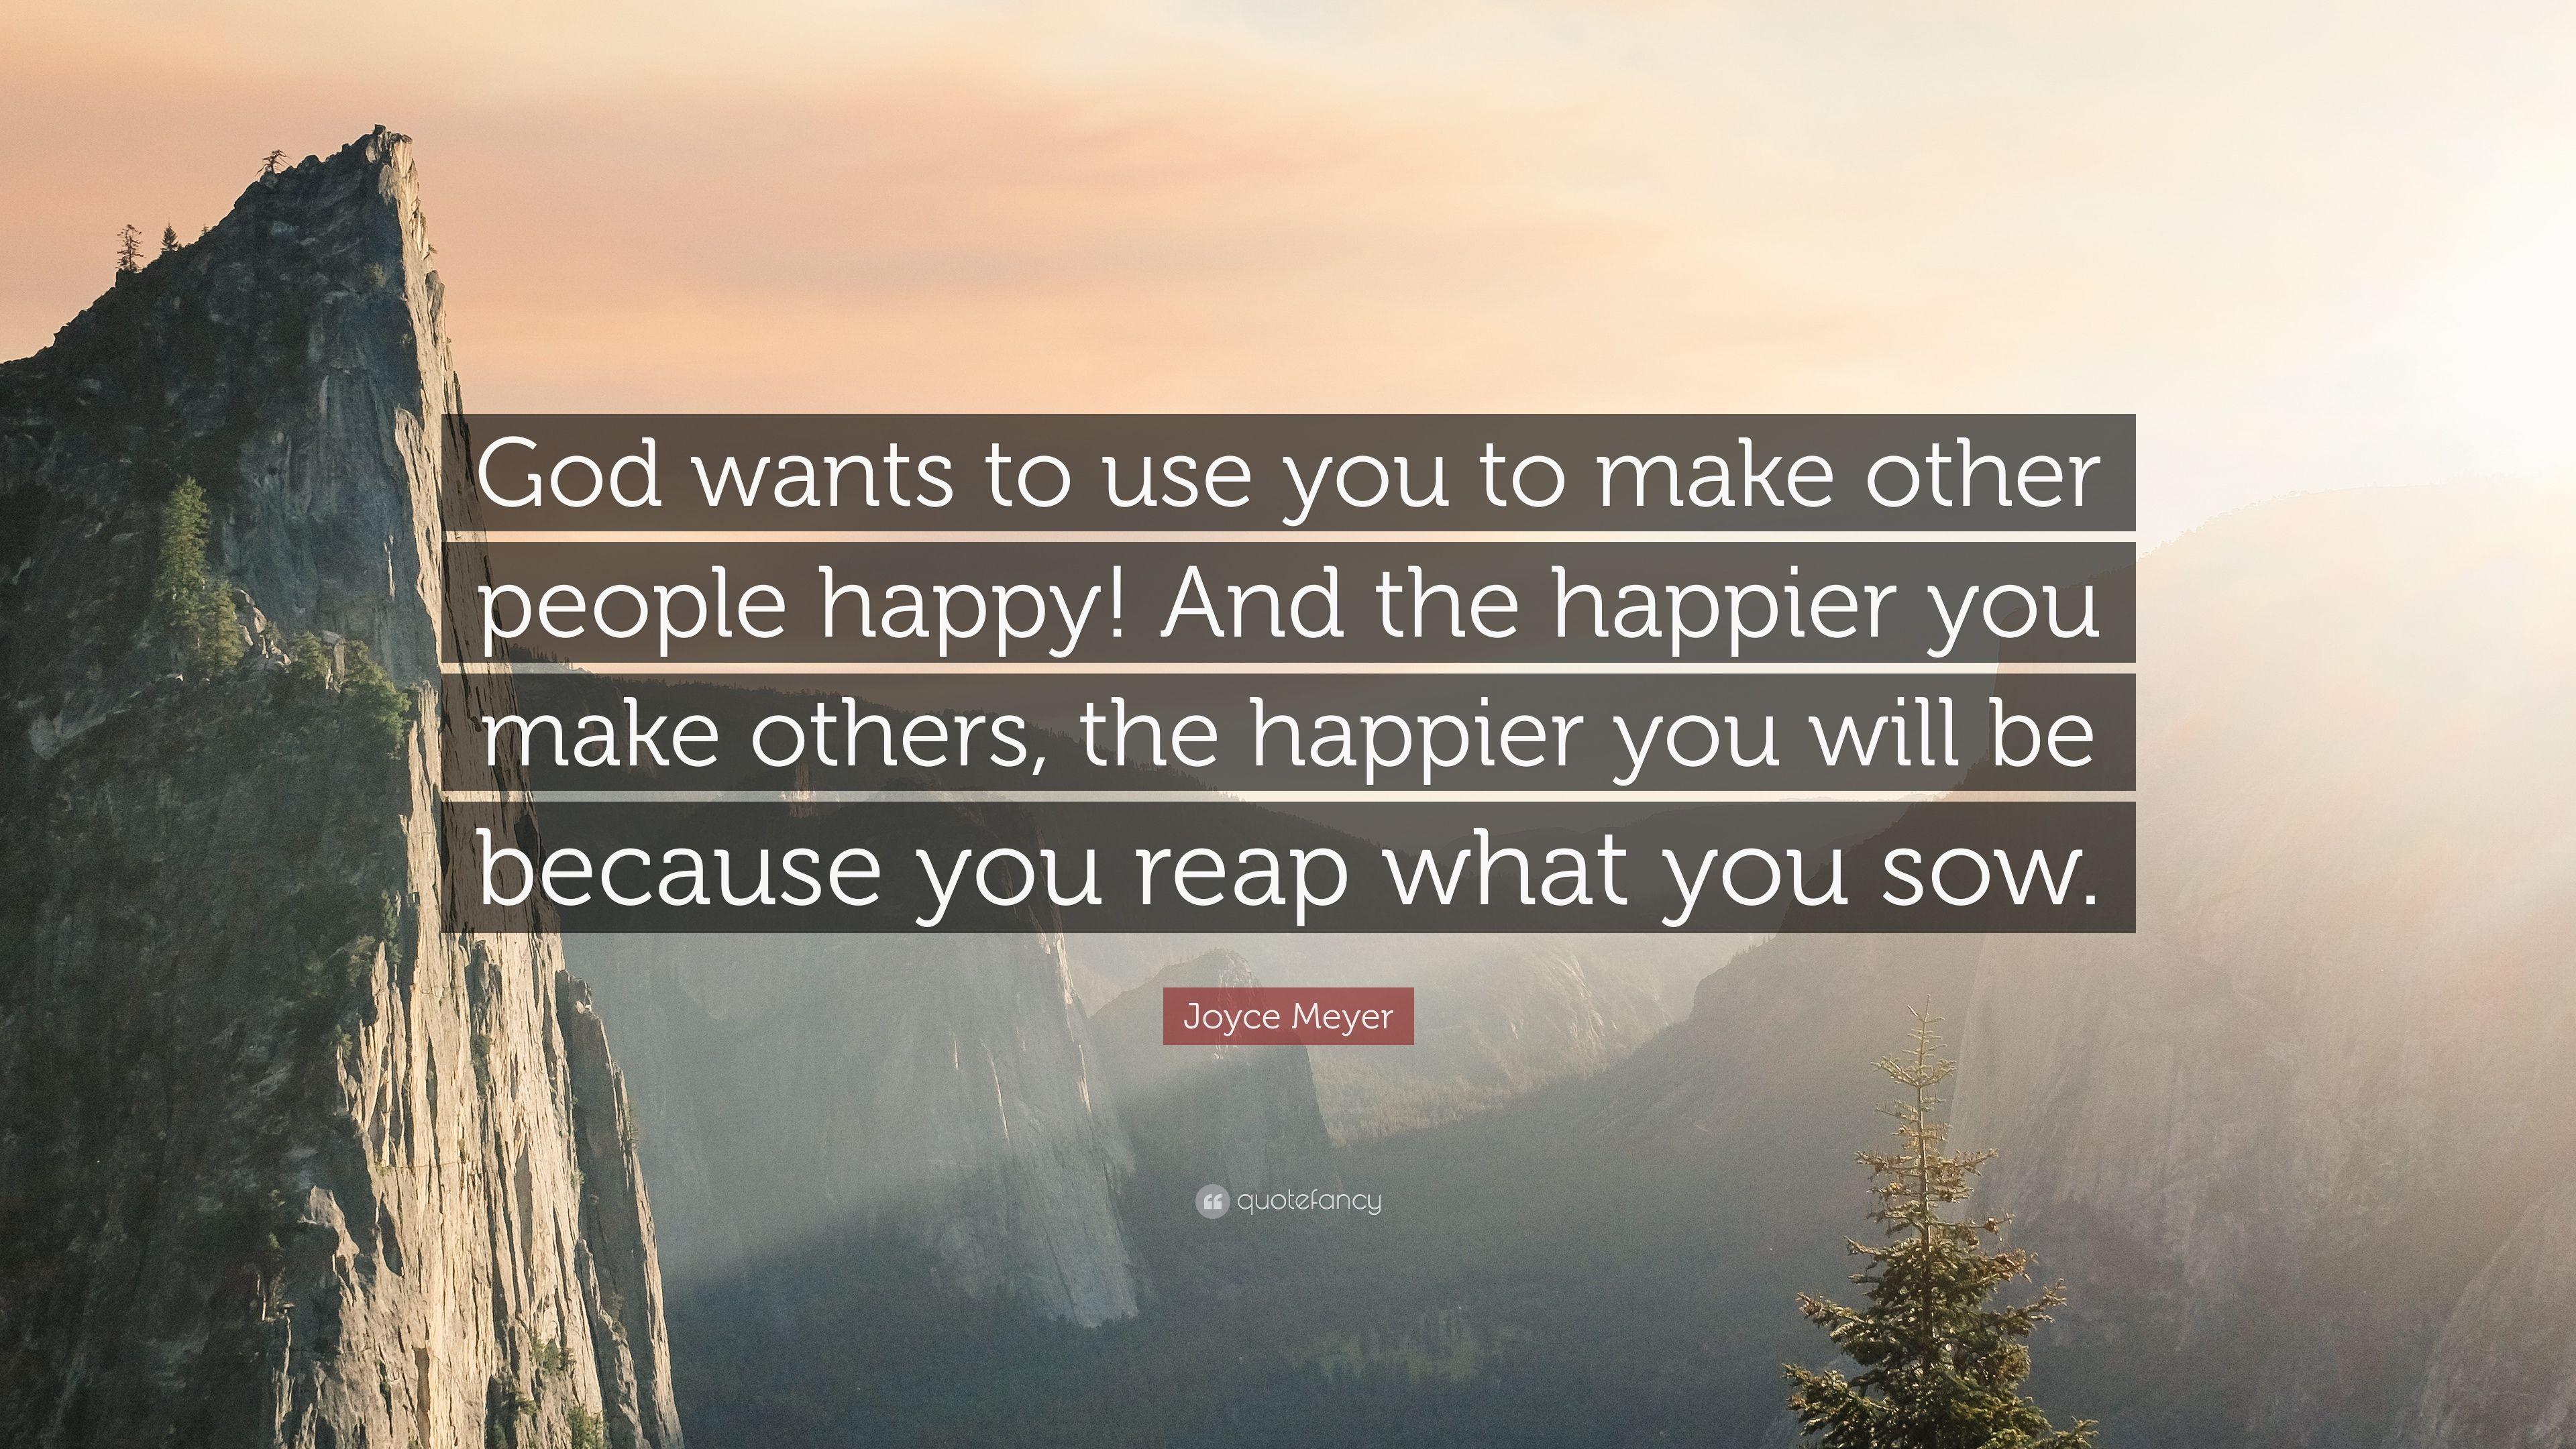 Joyce Meyer Quote: “God wants to use you to make other people happy